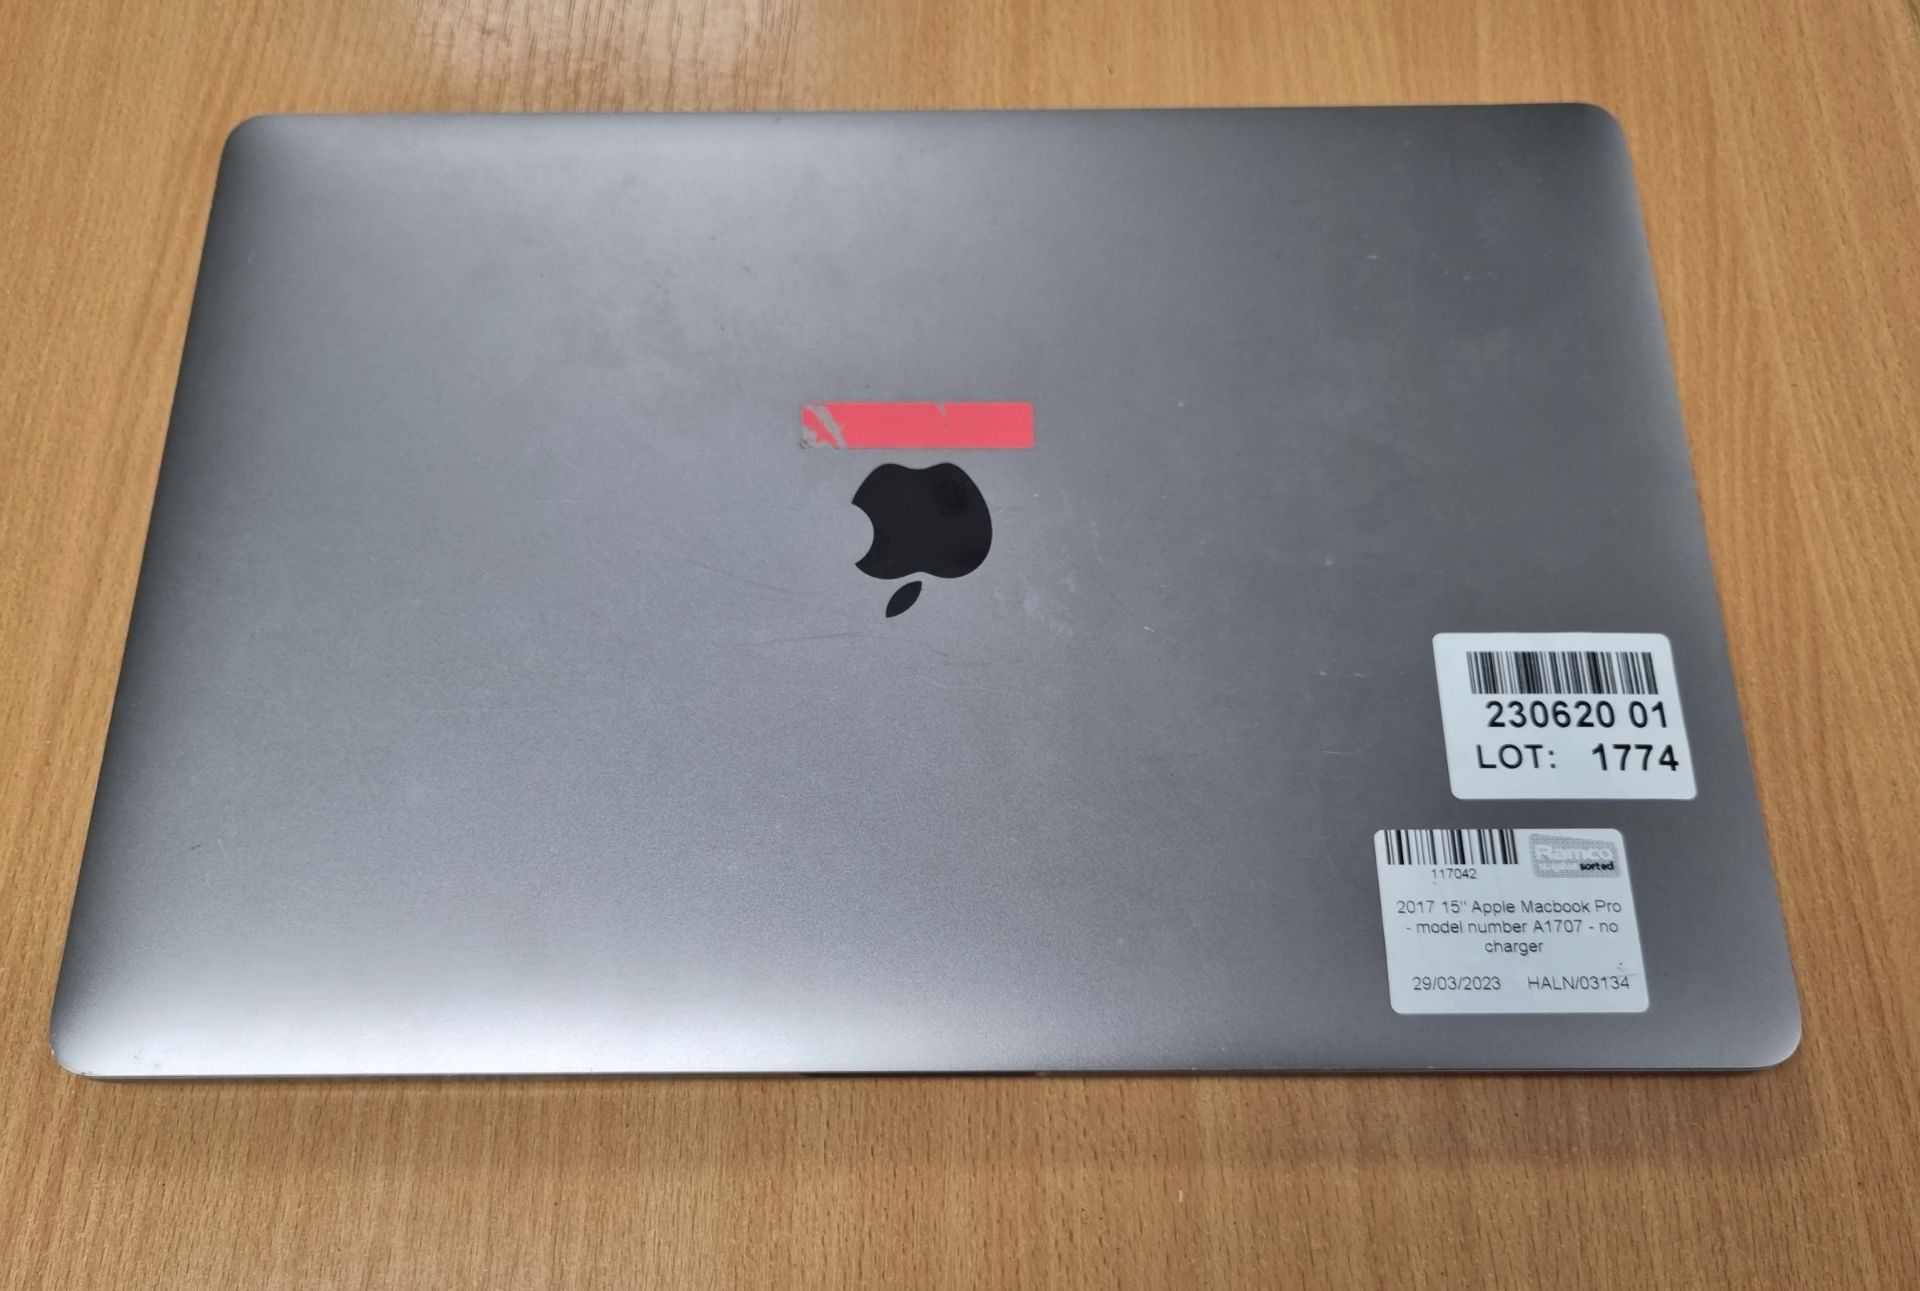 2017 15 inch Apple Macbook Pro - model number A1707 - charger included - Image 2 of 5